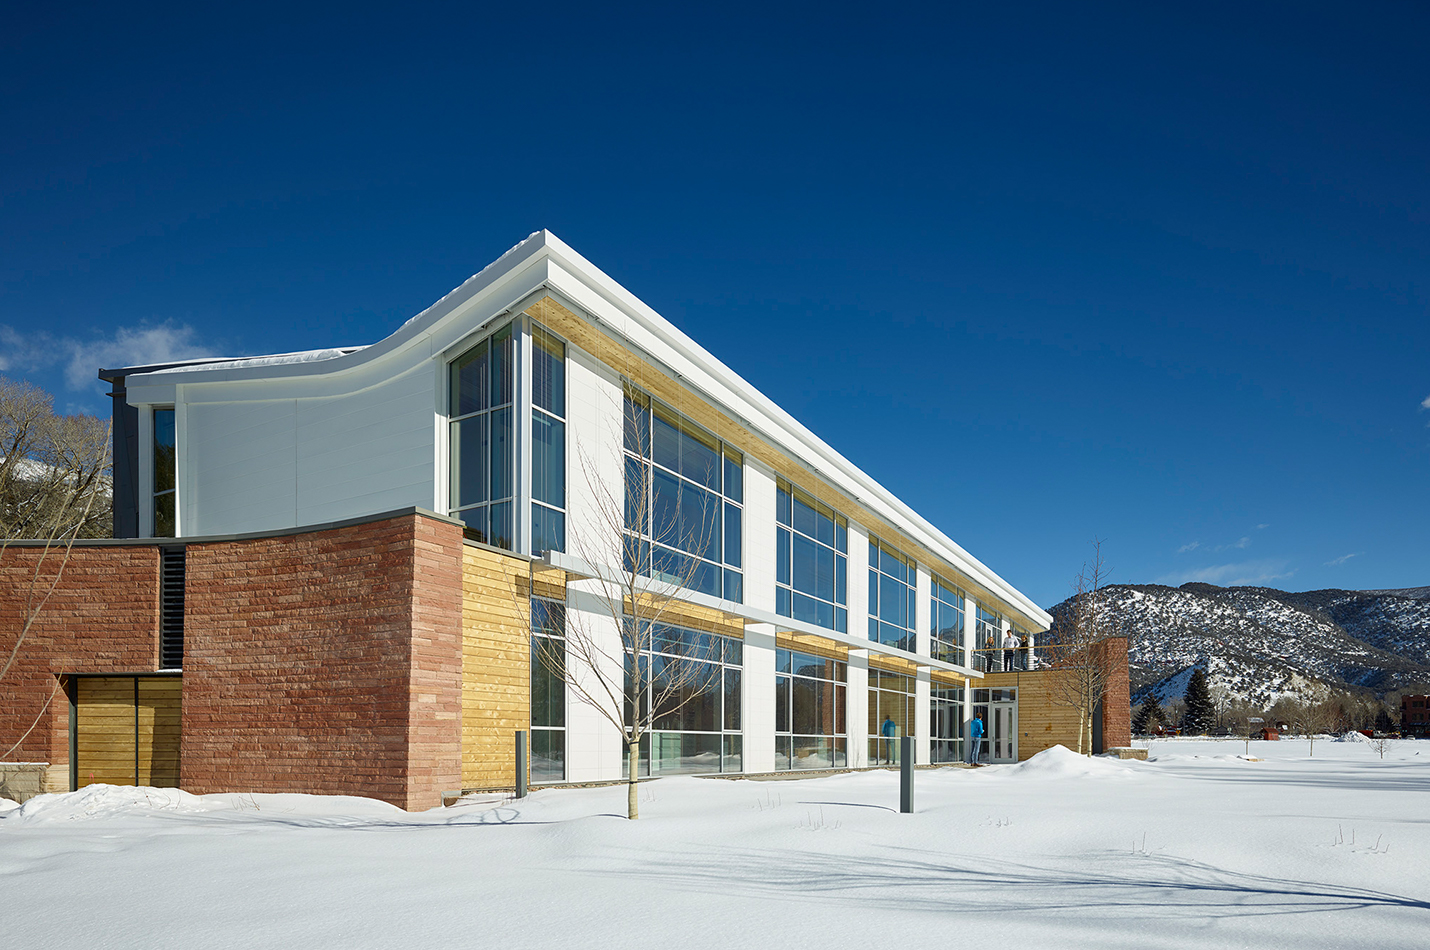 The Rocky Mountain Institute Innovation Center